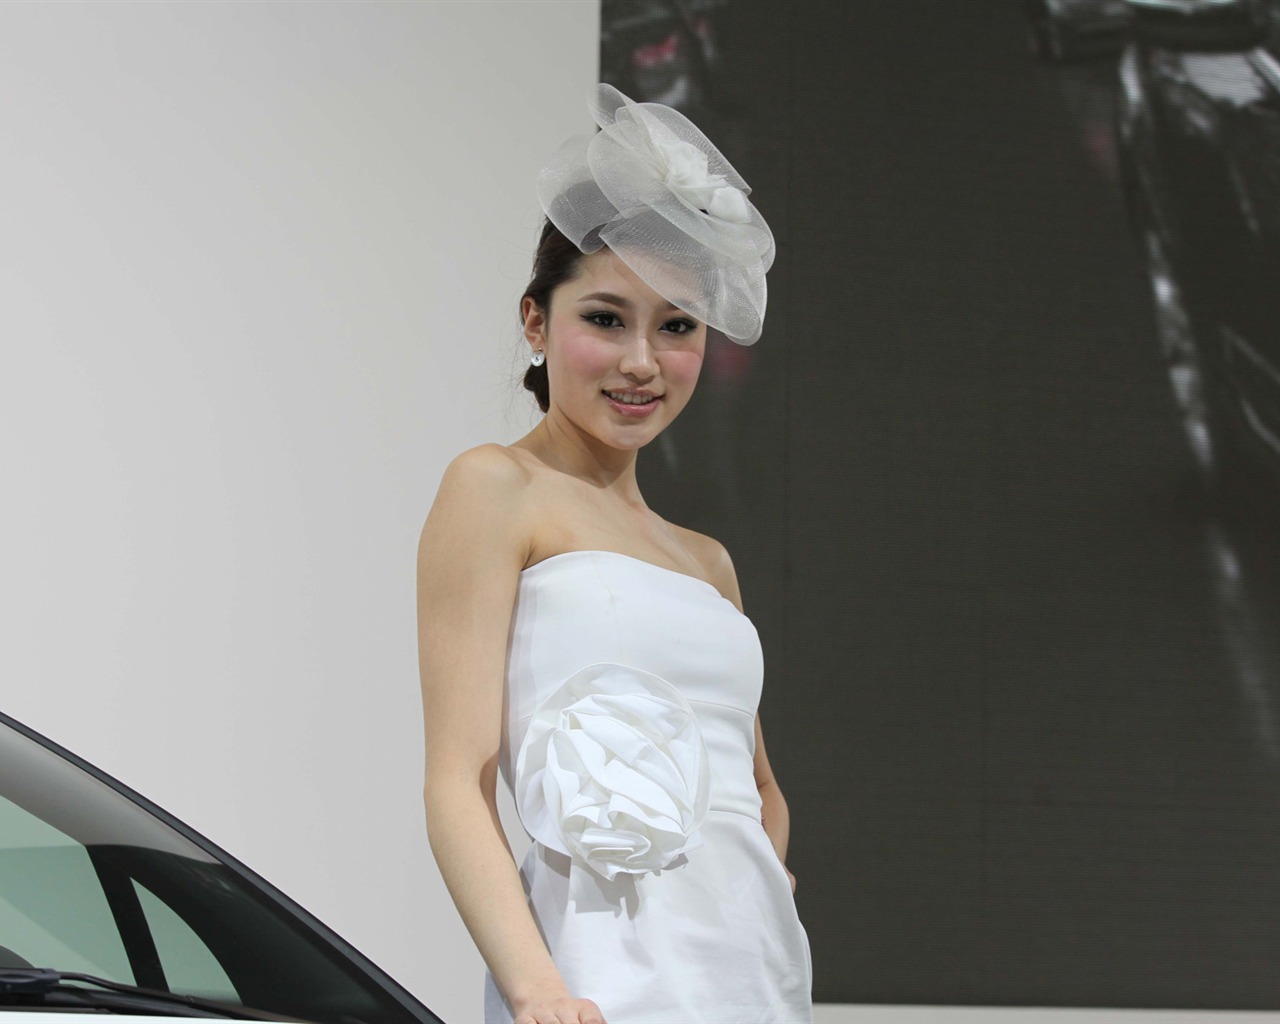 2010 Beijing International Auto Show beauty (2) (the wind chasing the clouds works) #31 - 1280x1024